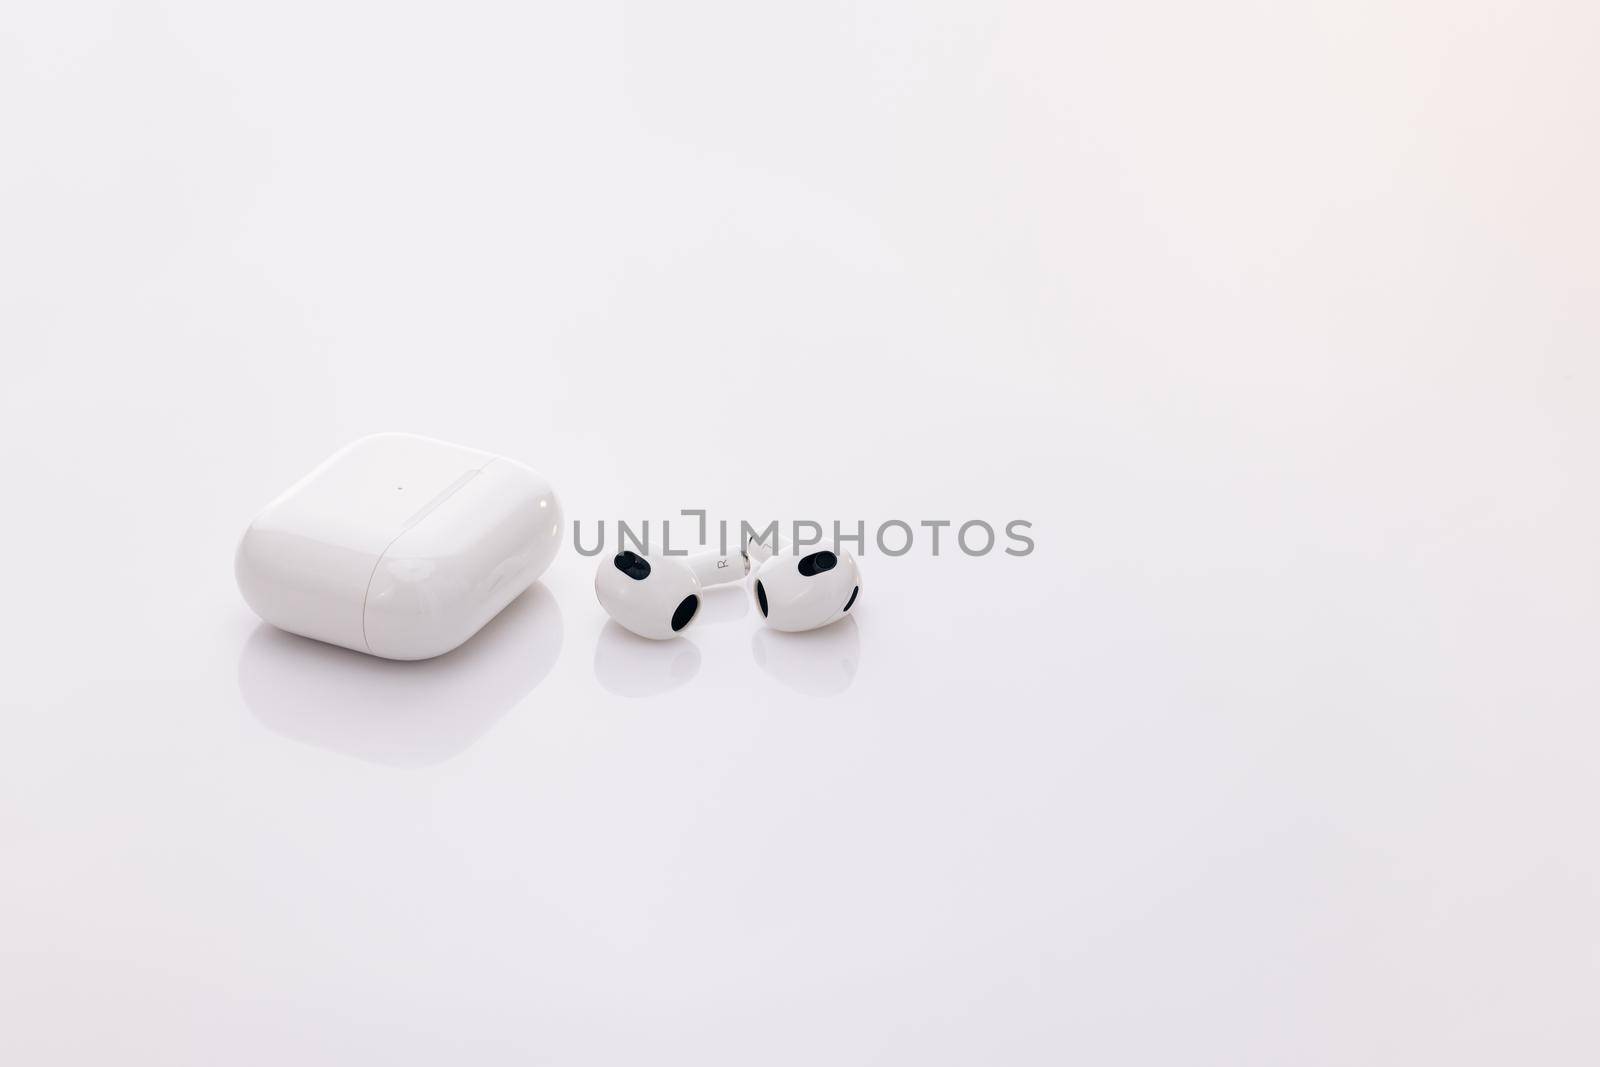 Gadgets and electronic devices. Wireless headphones with charging case. Wireless earphone with noise cancelling technology. Bluetooth headphones isolated on white background.